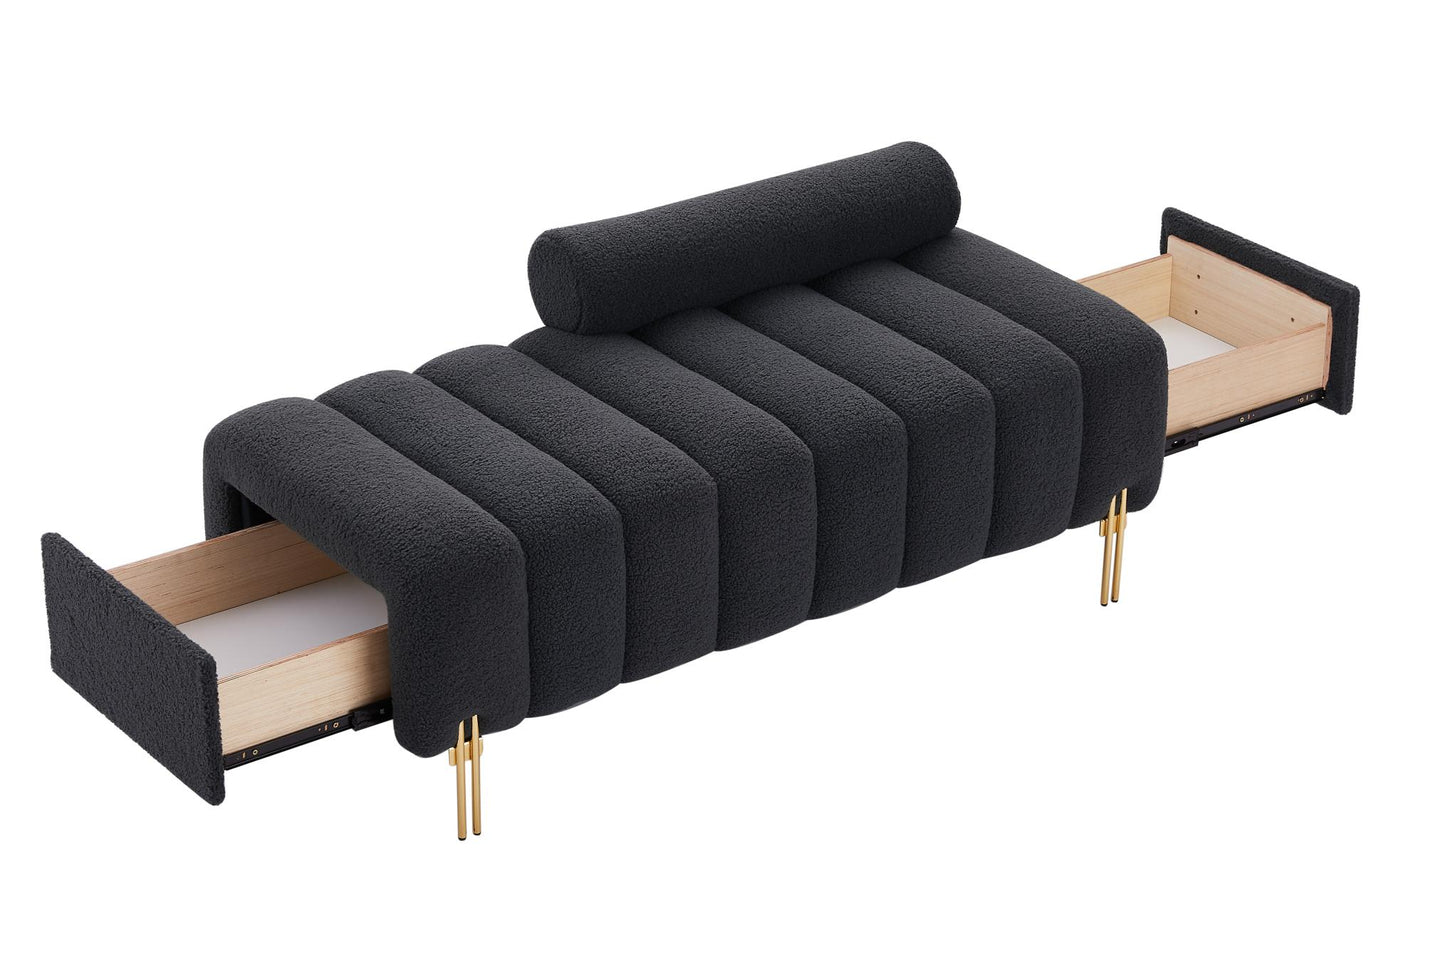 Modern End of Bed Bench Upholstered Teddy Entryway Ottoman Bench Fuzzy Sofa Stool Footrest Window Bench with Gold Metal Legs for Bedroom Apartments